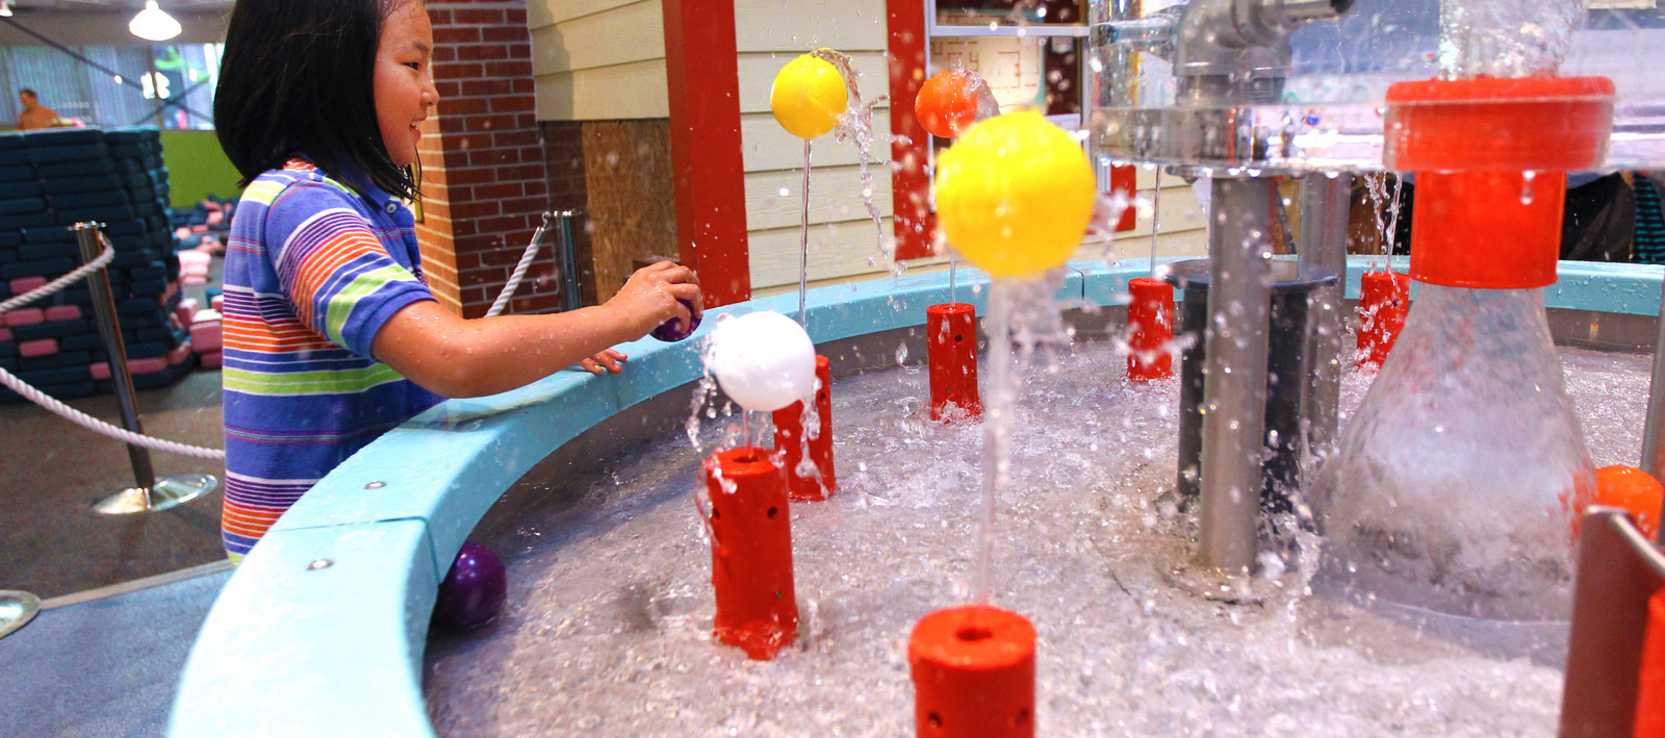 A little girl plays in an interactive water exhibit at the Hands-On Museum in Ann Arbor.